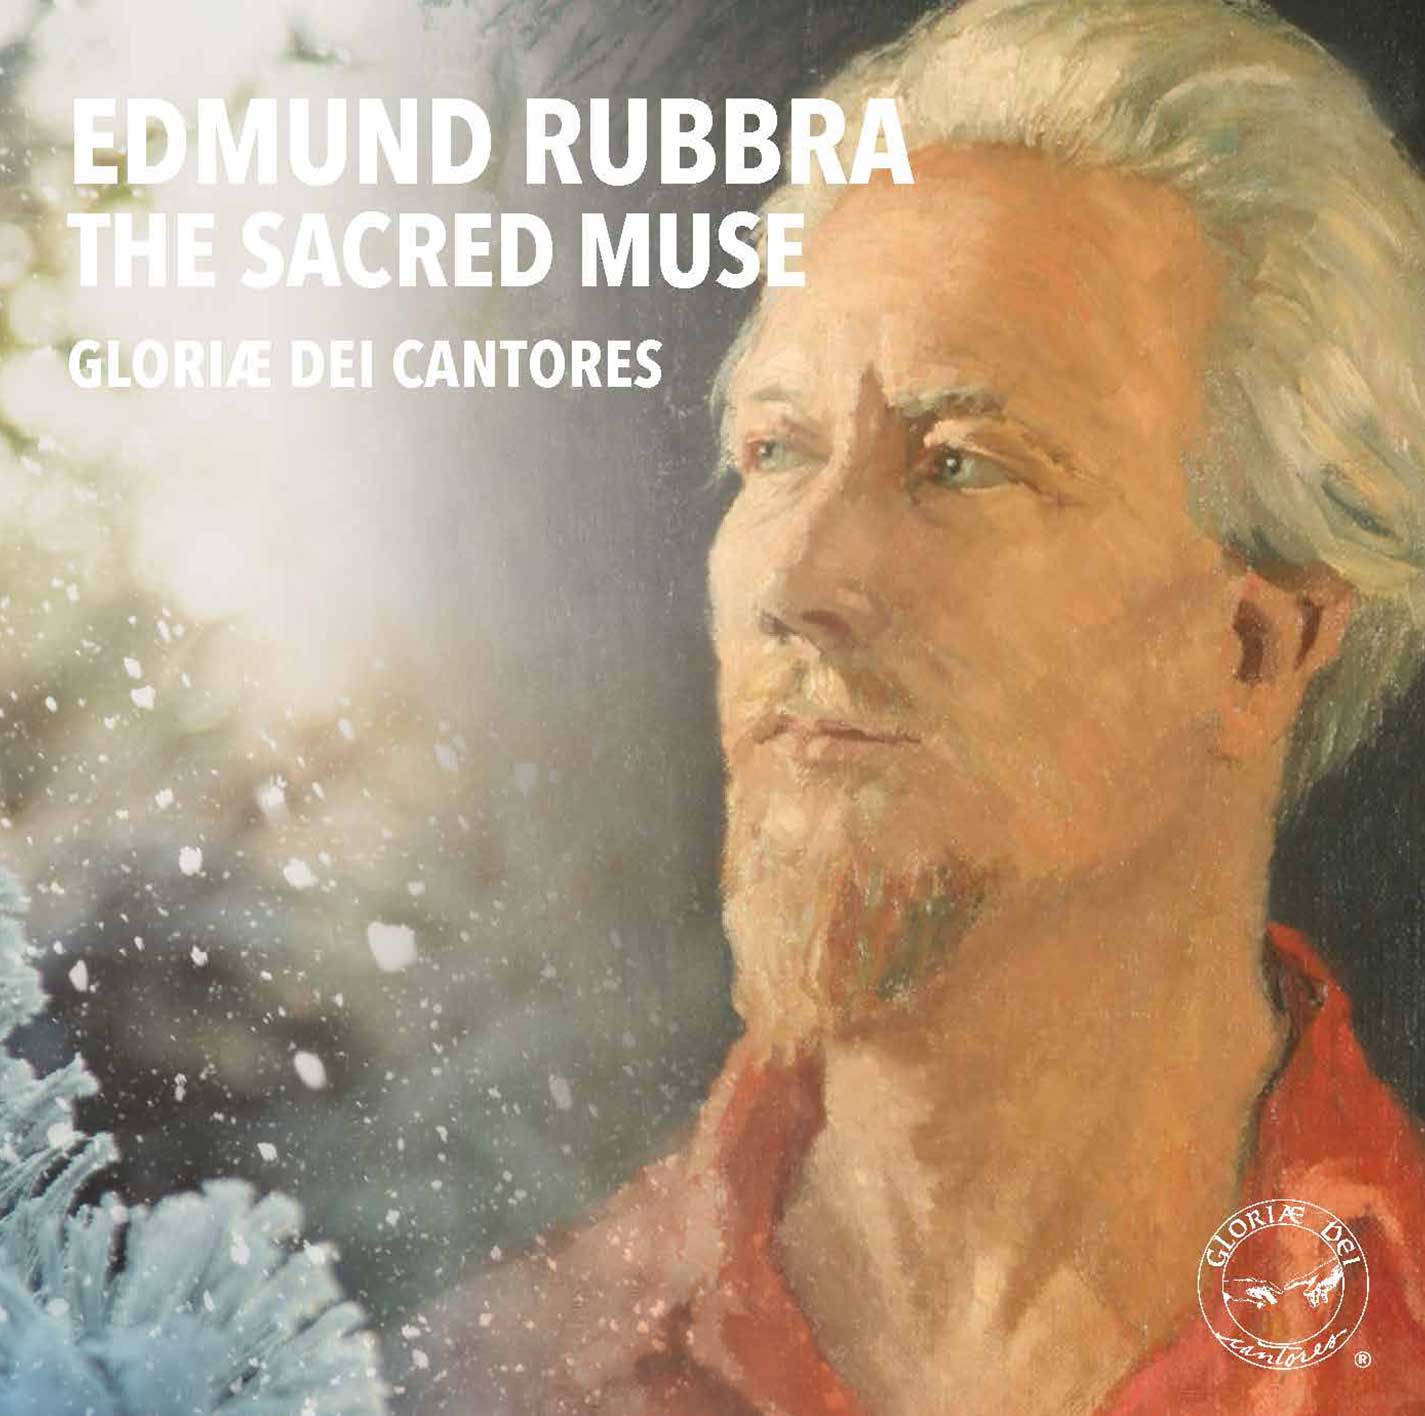 product image of 'Edmund Rubbra: The Sacred Muse' Gloriae Dei Cantores choral recording